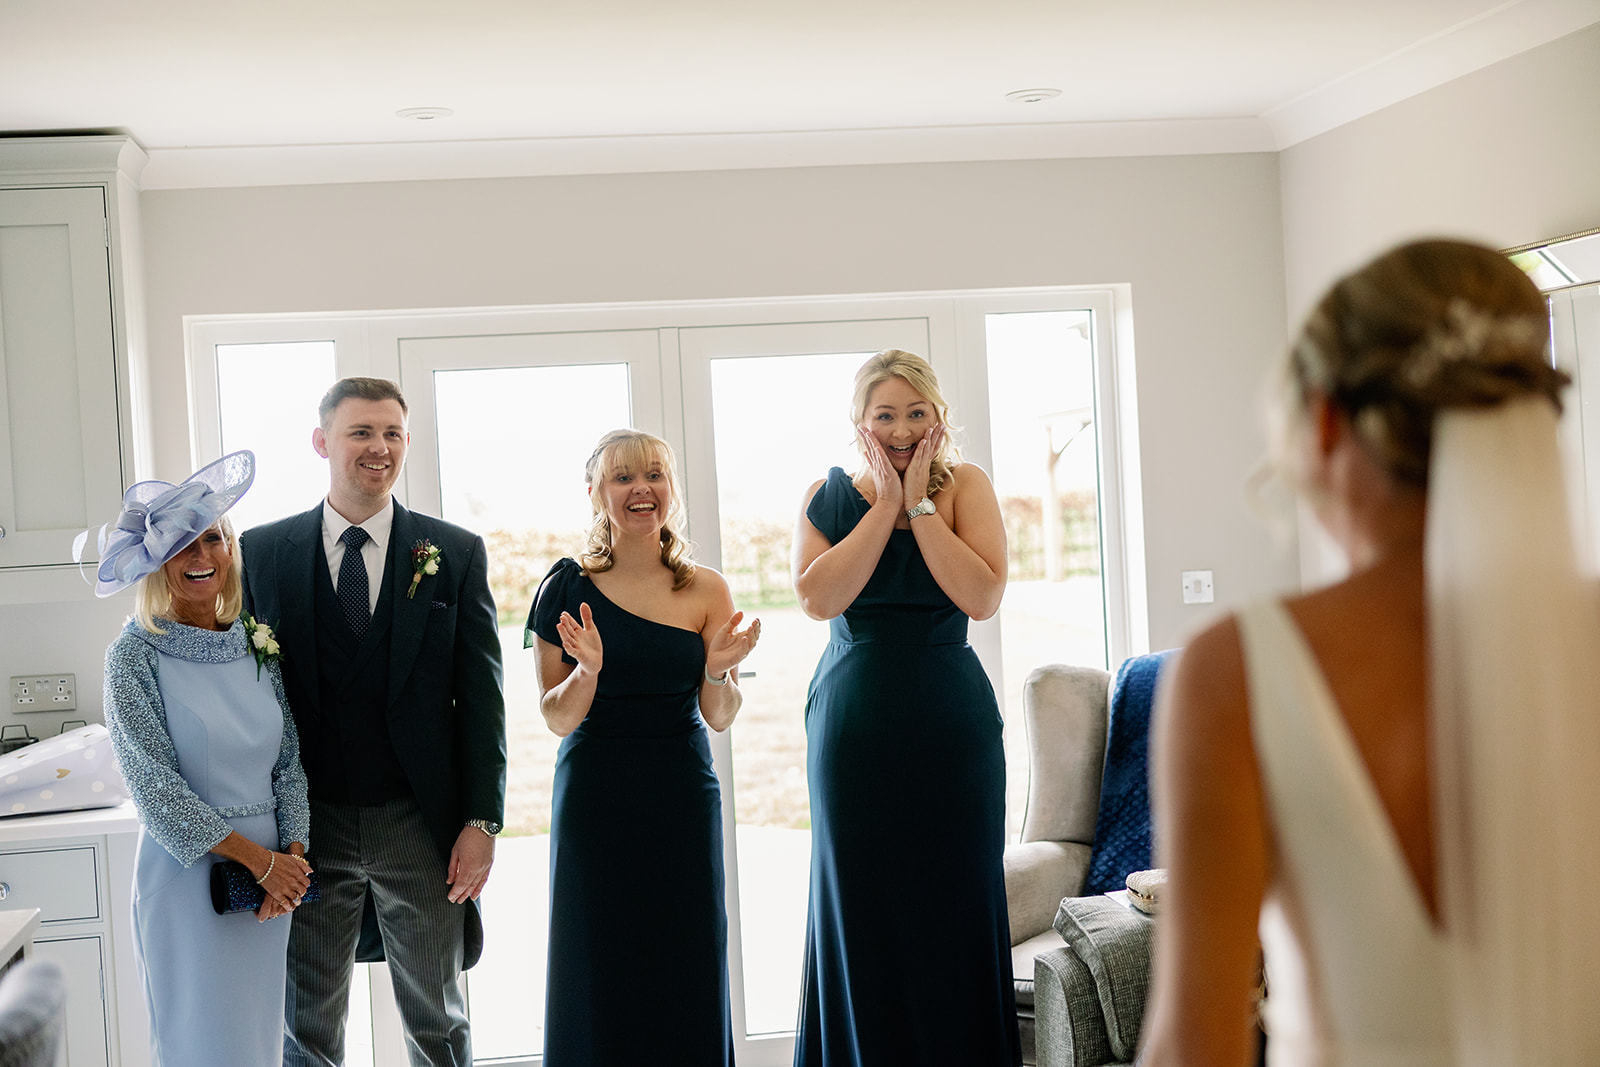 mum, brother and bridesmaids looking blown away after seeing the bride for the first time in her wedding dress 